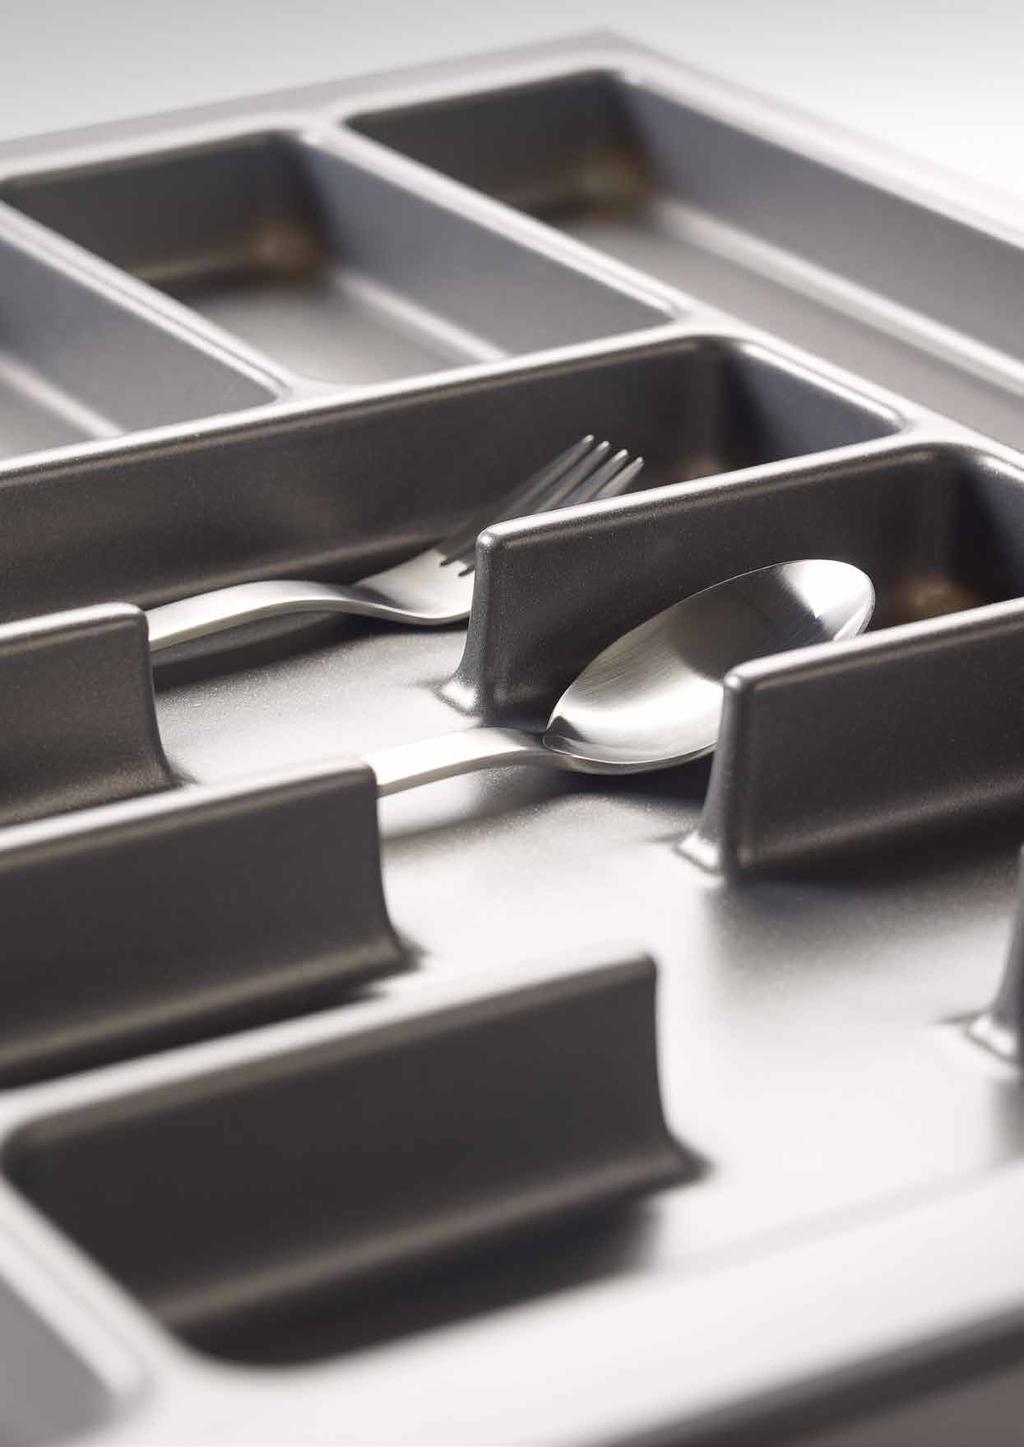 FLATLINE Image: Anthracite mat We manufacture cutlery inserts with a height of 35 mm for height-reduced drawers, for example underneath a cooktop.